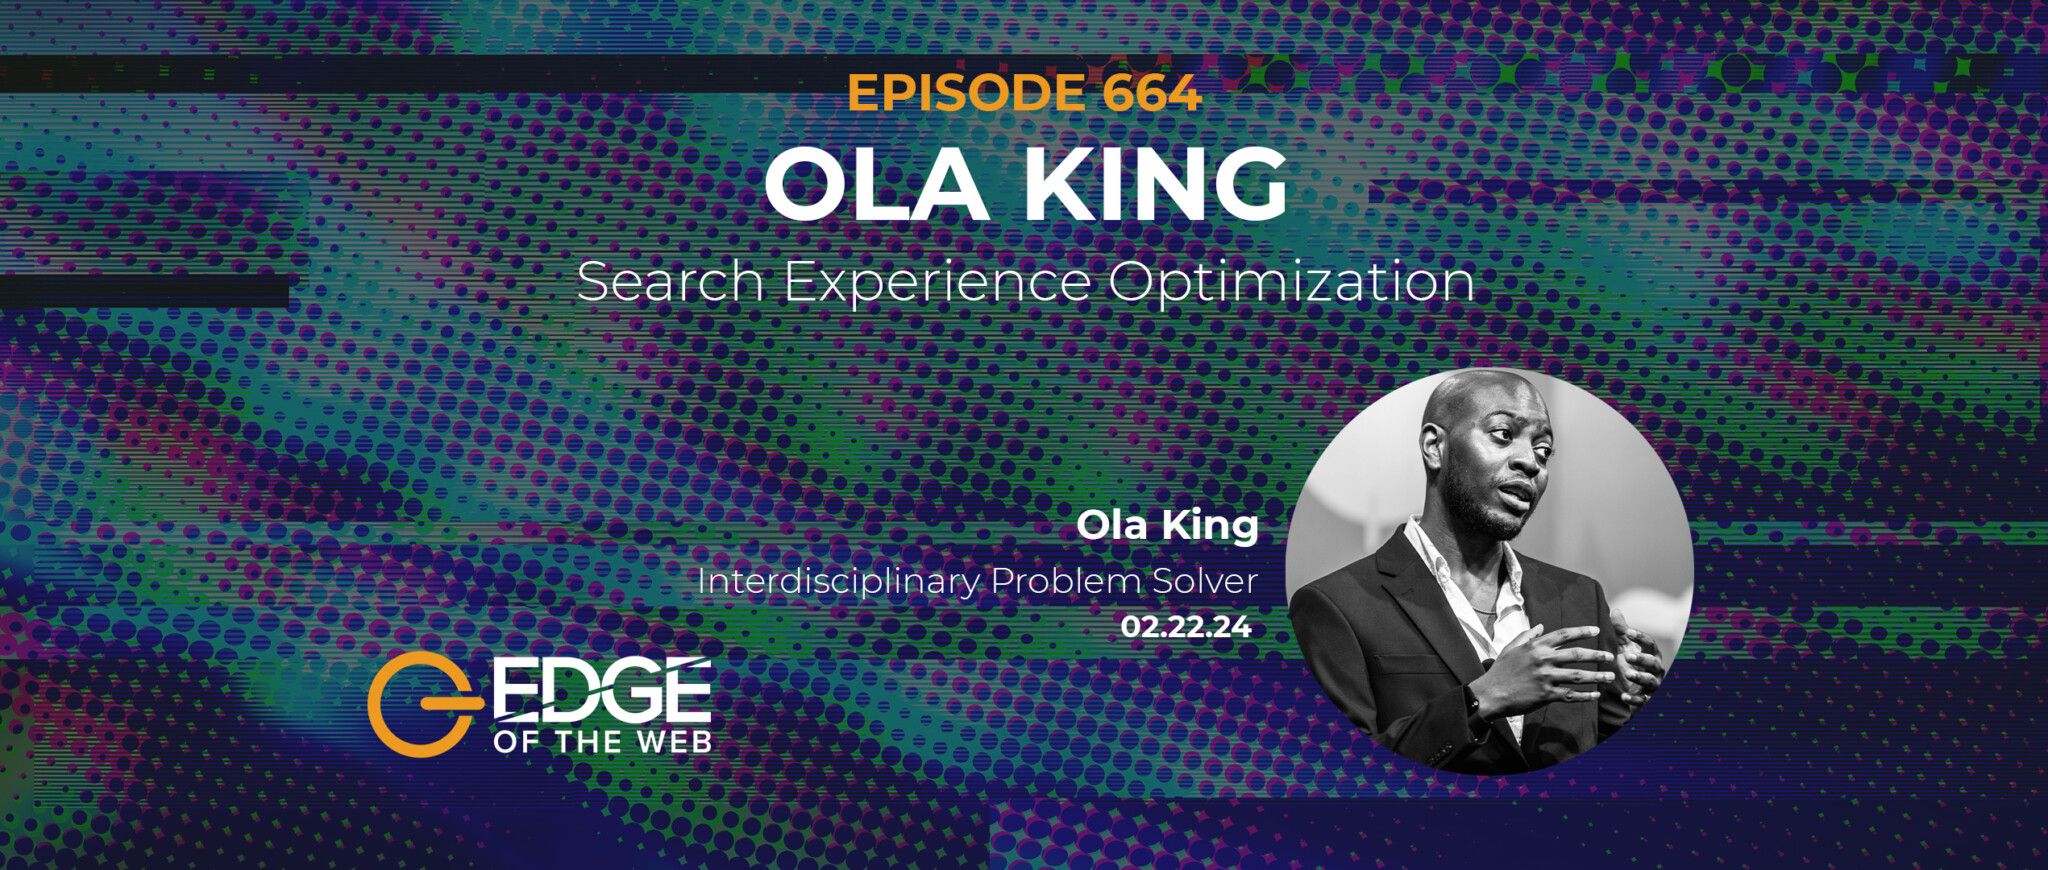 Episode 664: Search Experience Optimization w/ Ola King